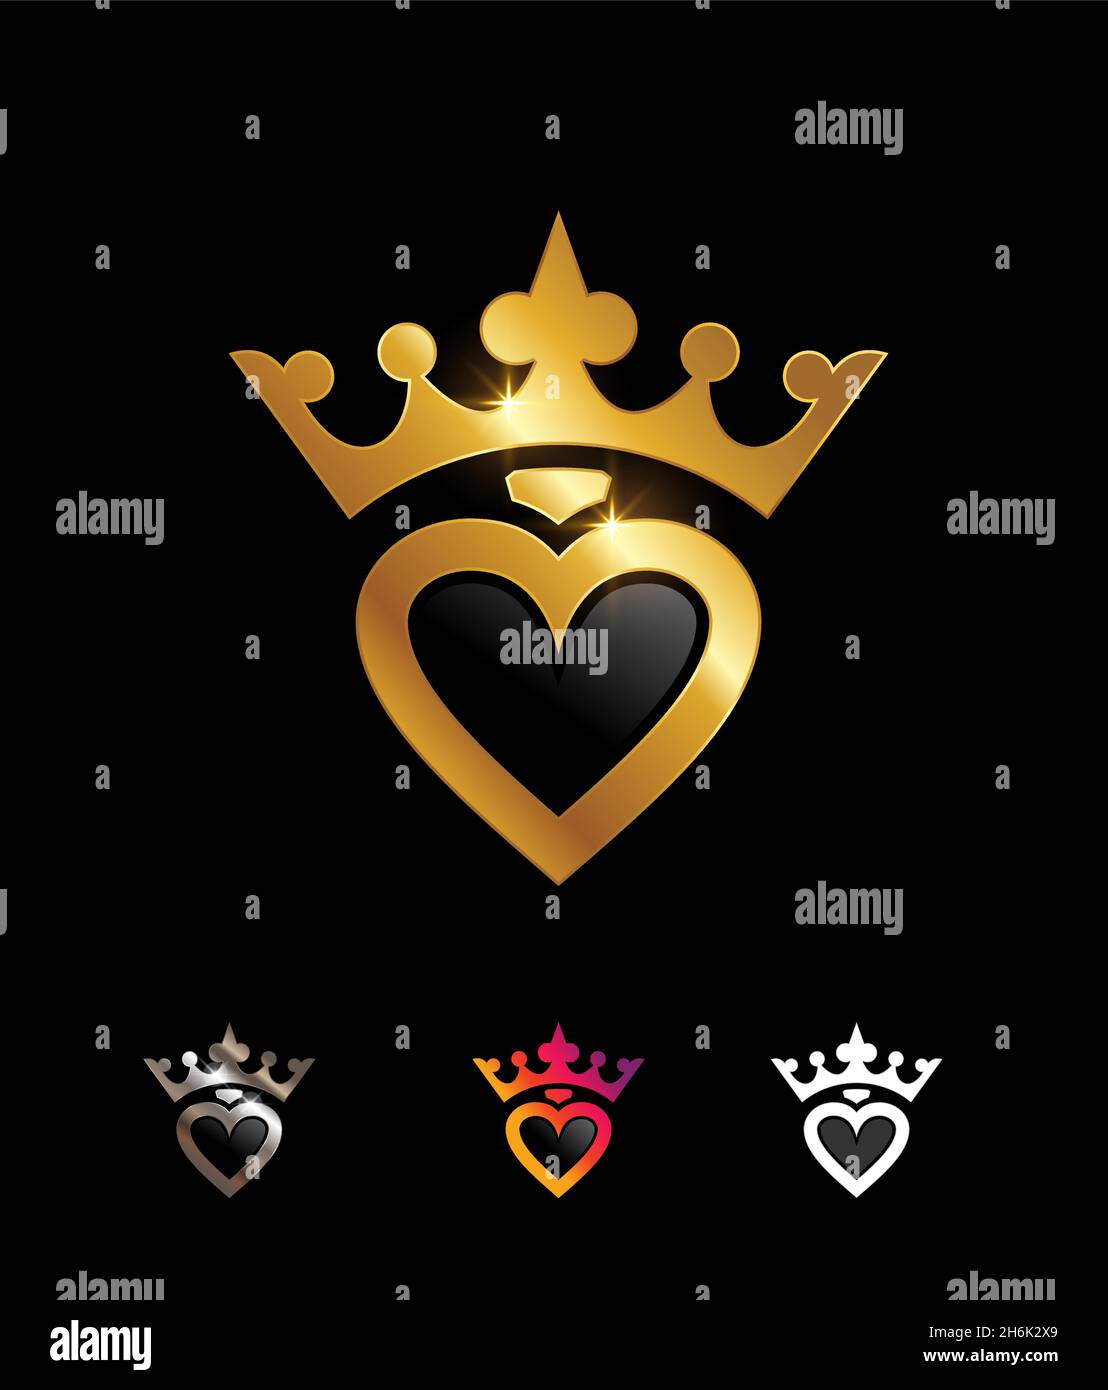 A Vector Illustration set of Golden Heart and Crown Symbol Sign Stock Vector